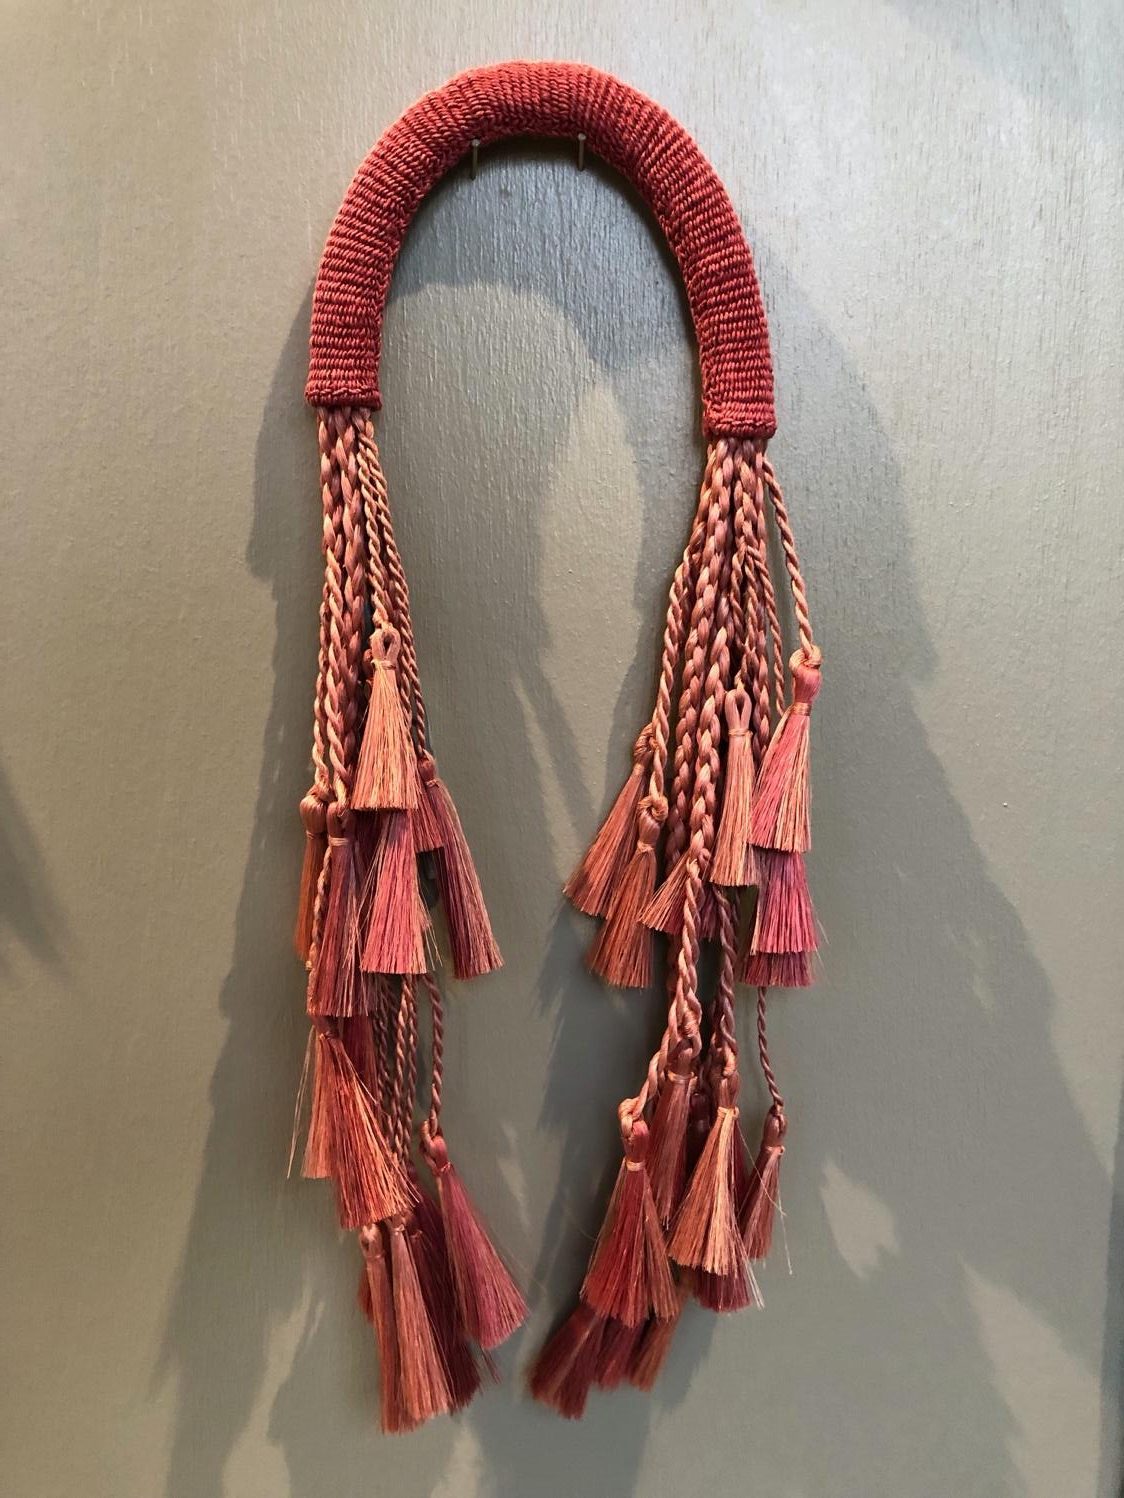 Venus y Loco, Red Tlacoyal Necklace, 2021, spun and hand braided agave fiber, dyed with Mexican Logwood, hand sewn assembly